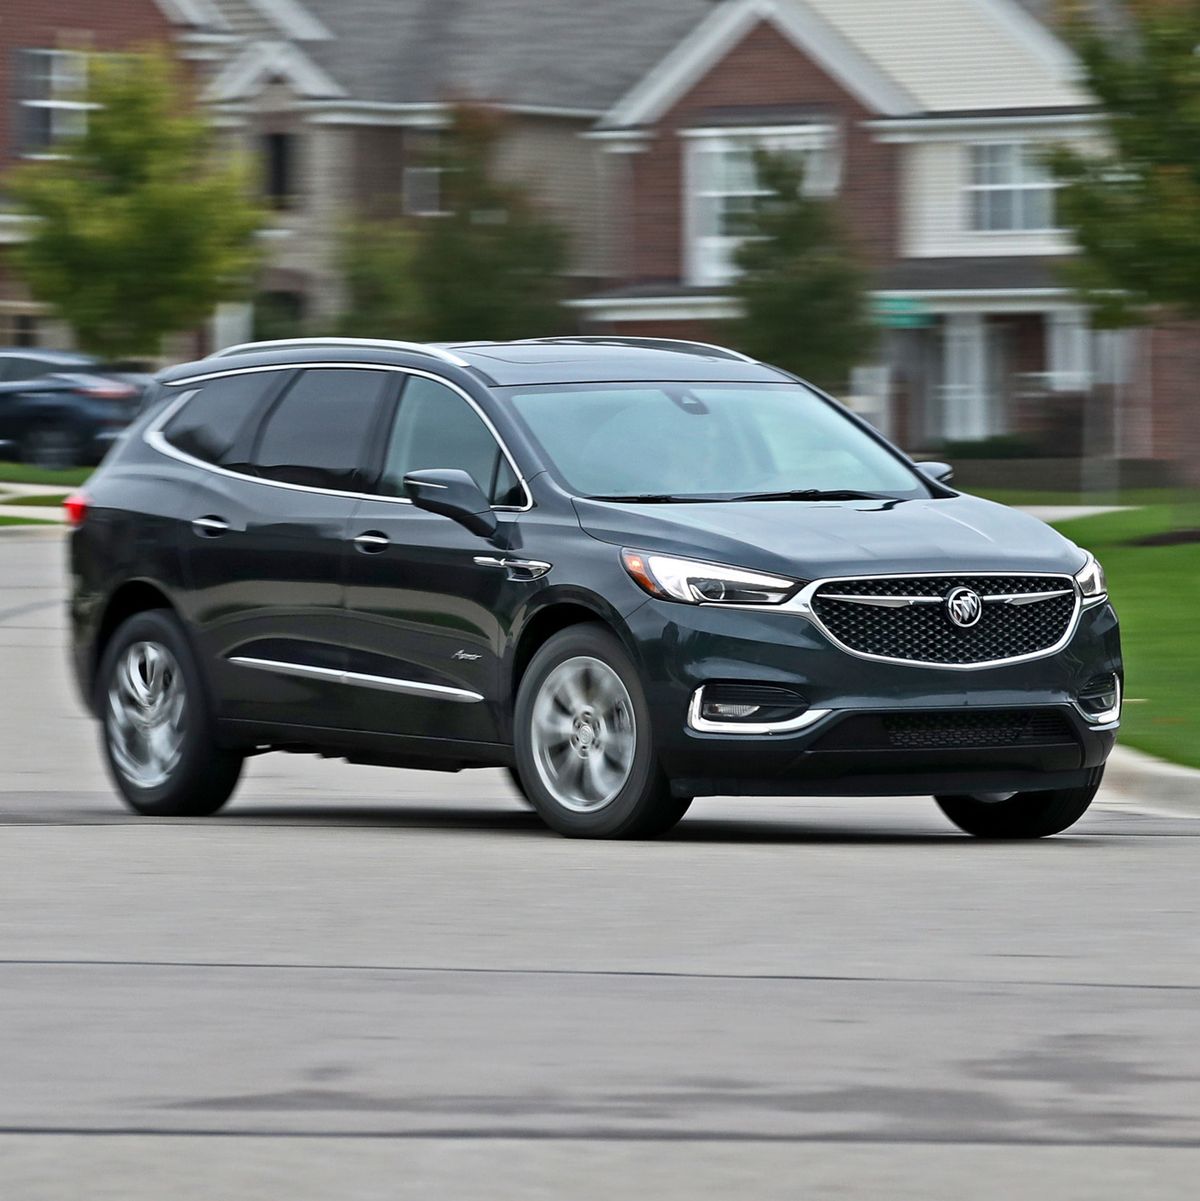 Tested: 2018 Buick Enclave AWD